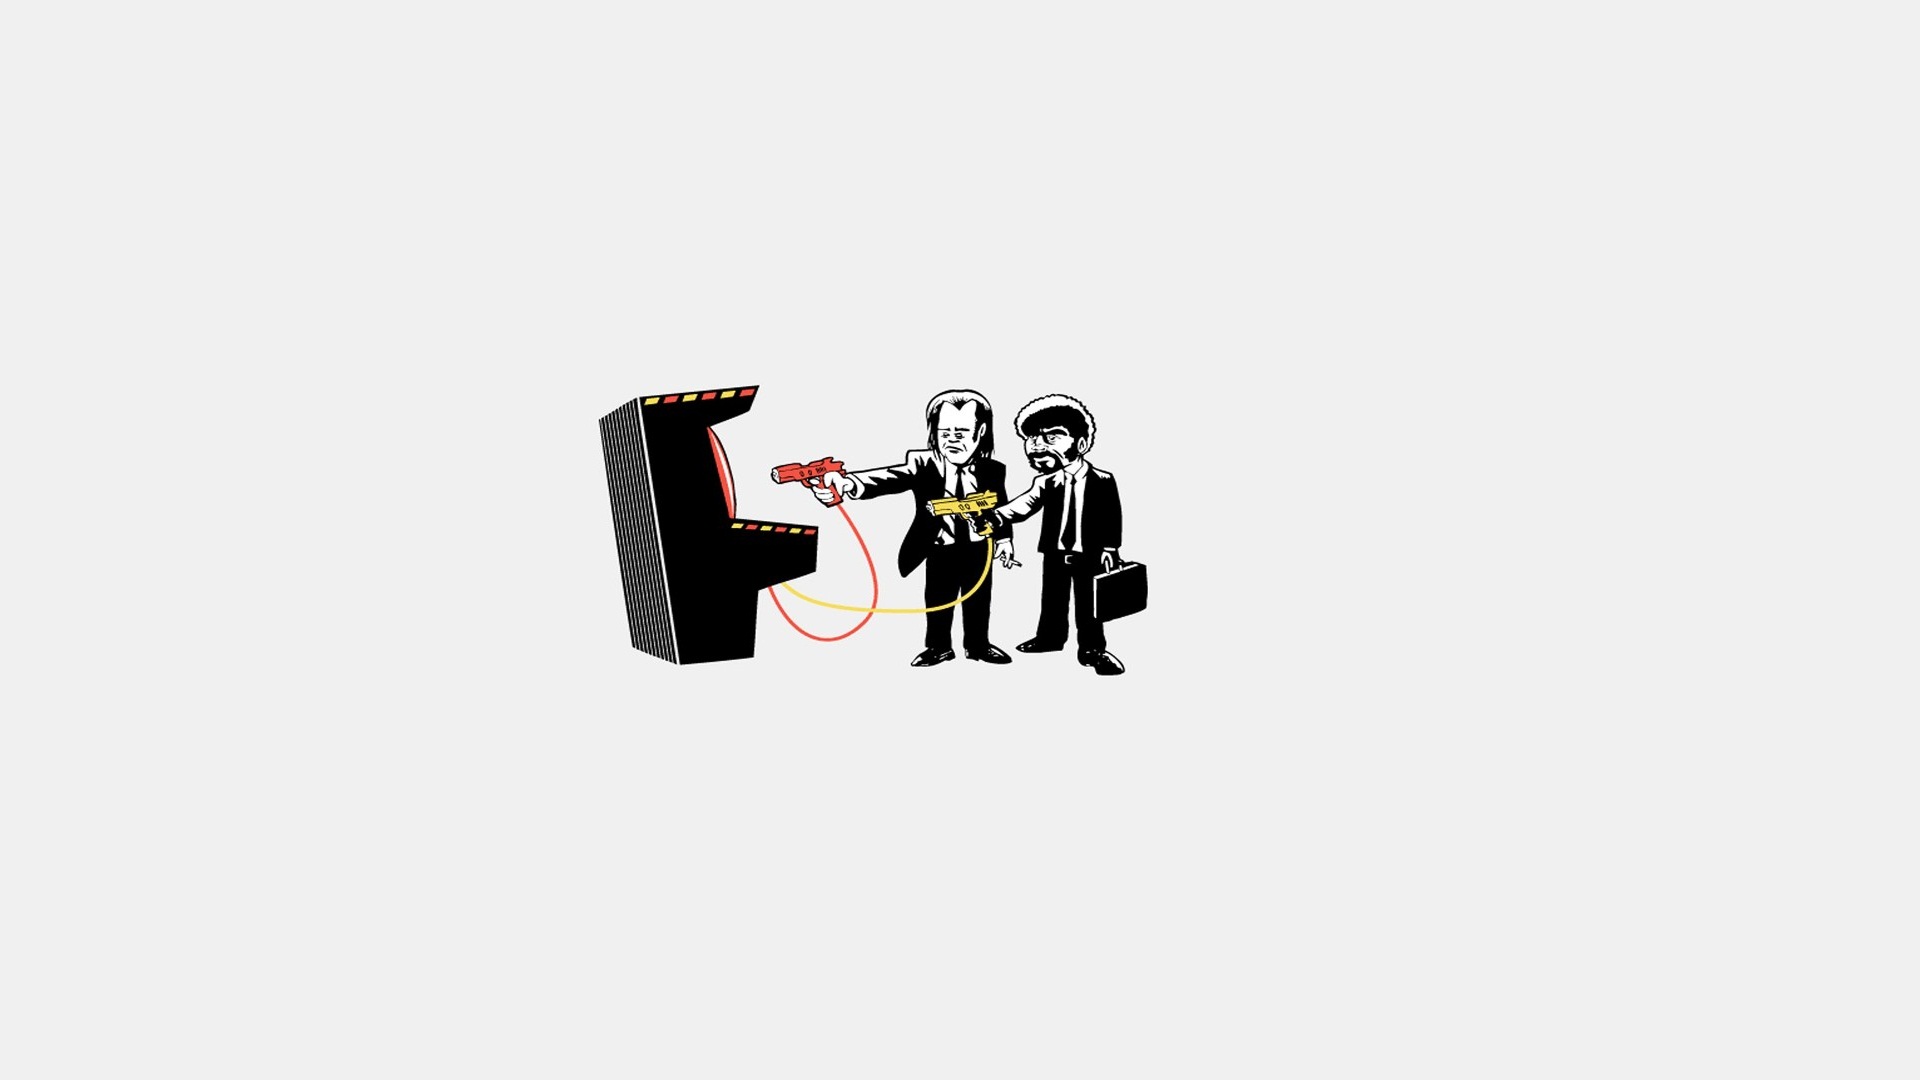 Pulp Fiction wallpaper by itzlordskull  Download on ZEDGE  22a3